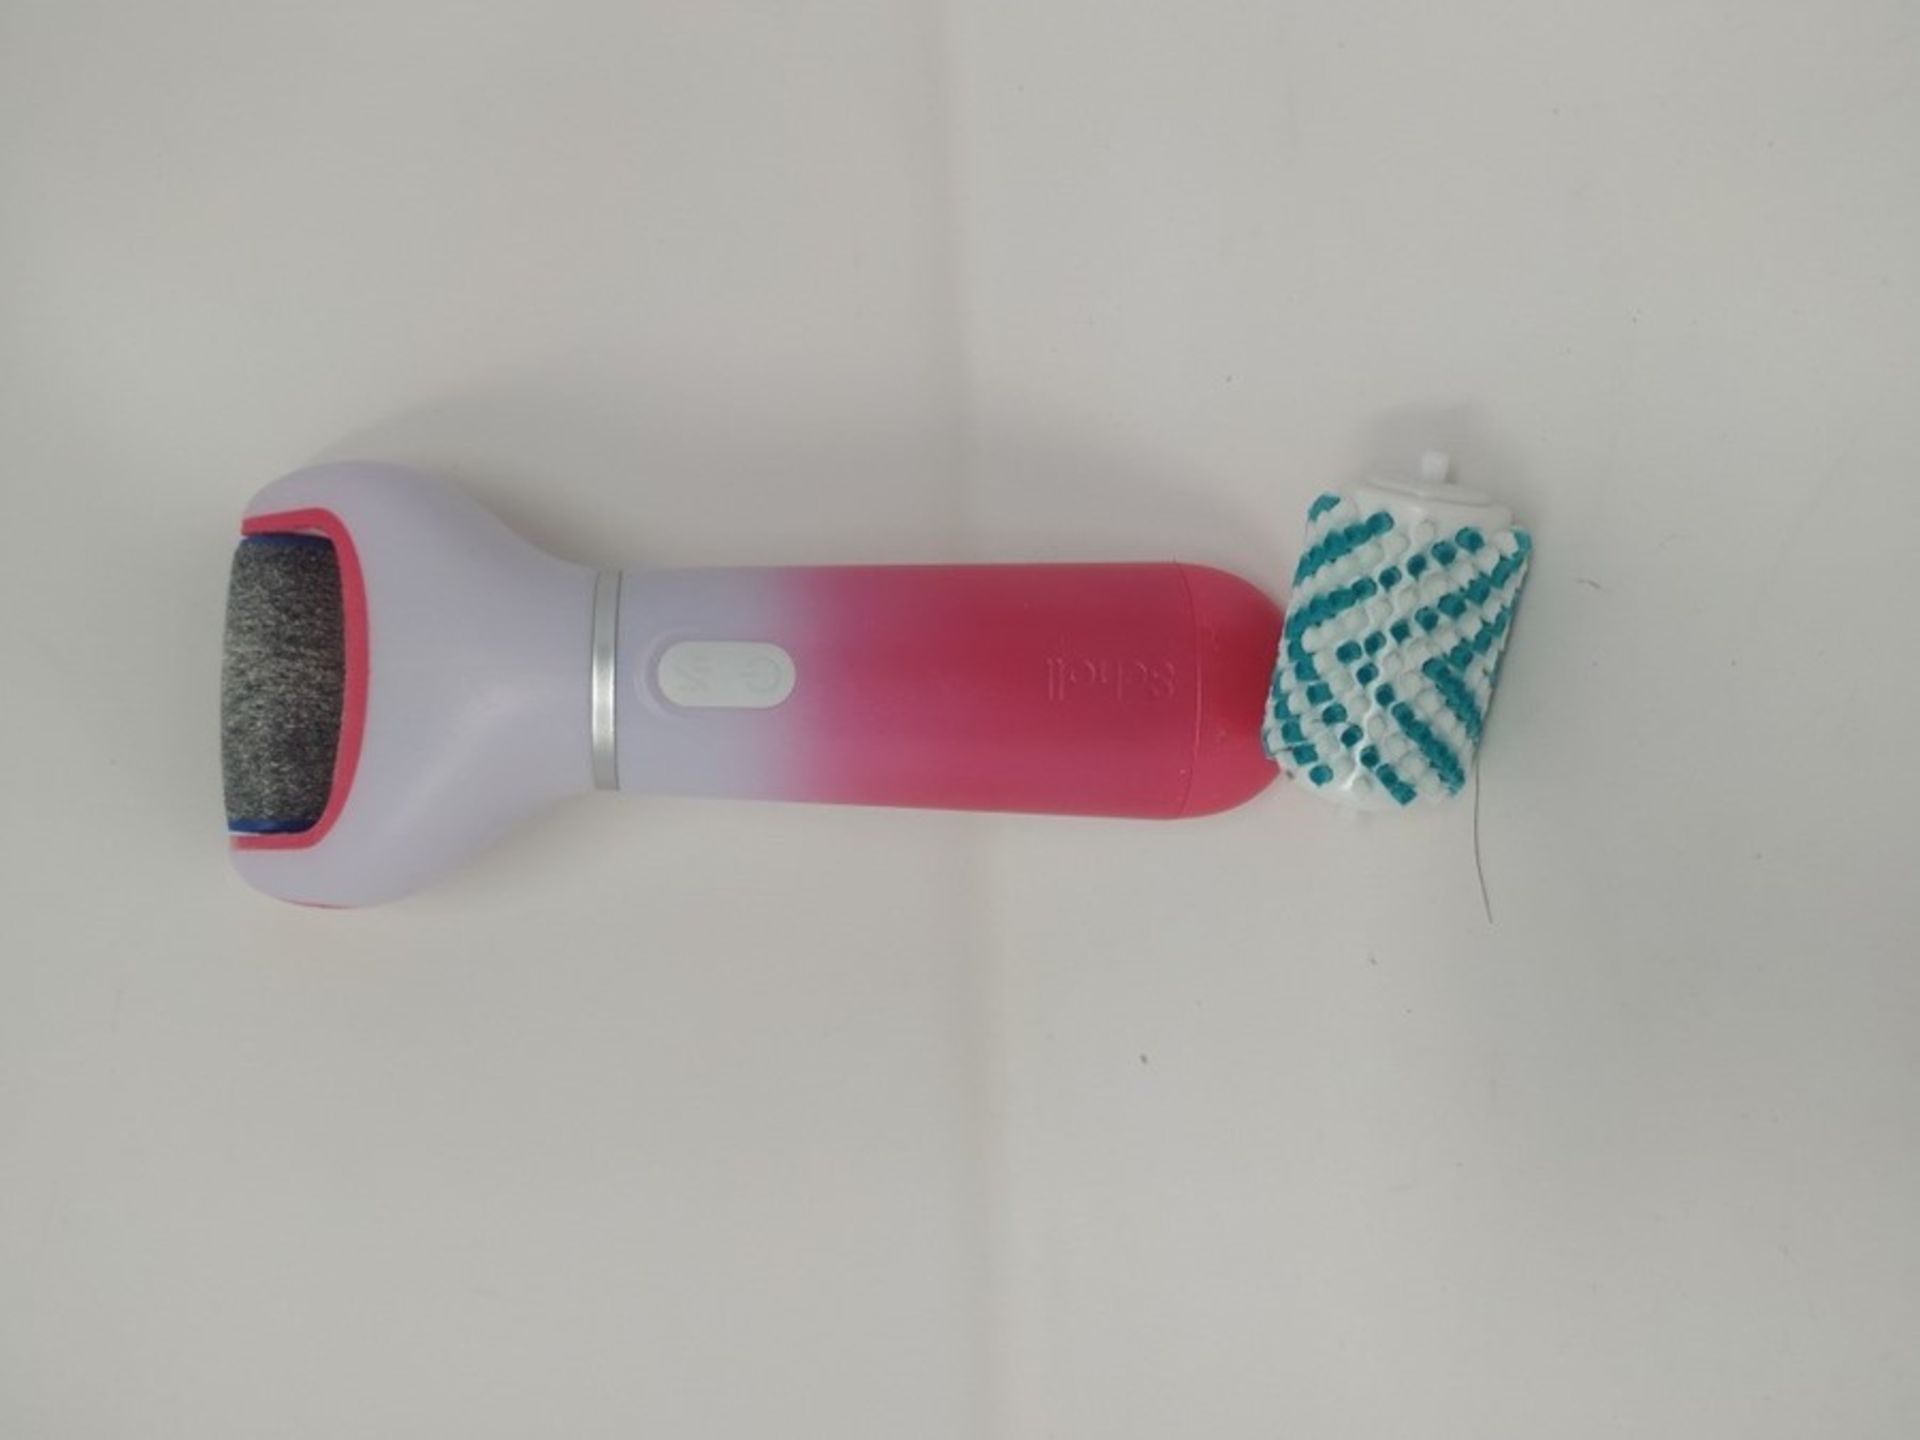 Scholl Velvet Smooth Electric Foot File with Exfoliating Refill - Image 2 of 2